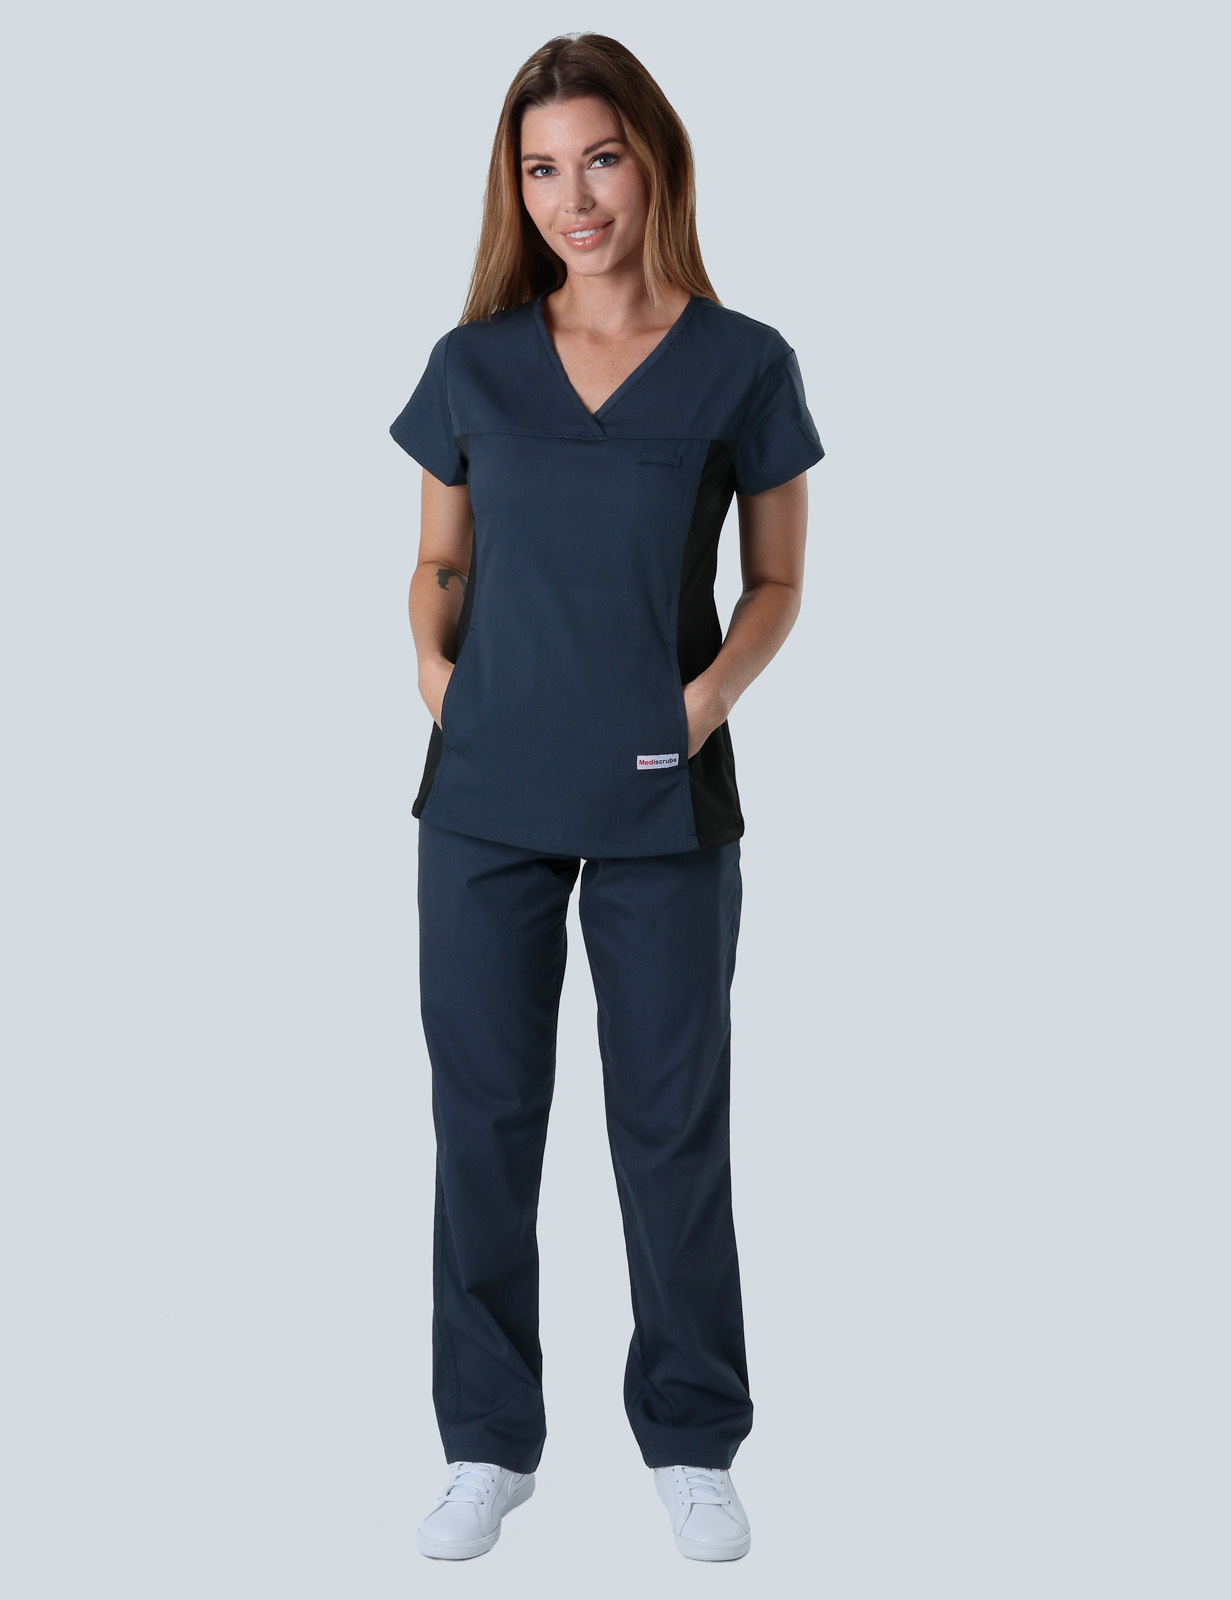 Women's Fit Solid Scrub Top With Spandex Panel - Navy - X Large